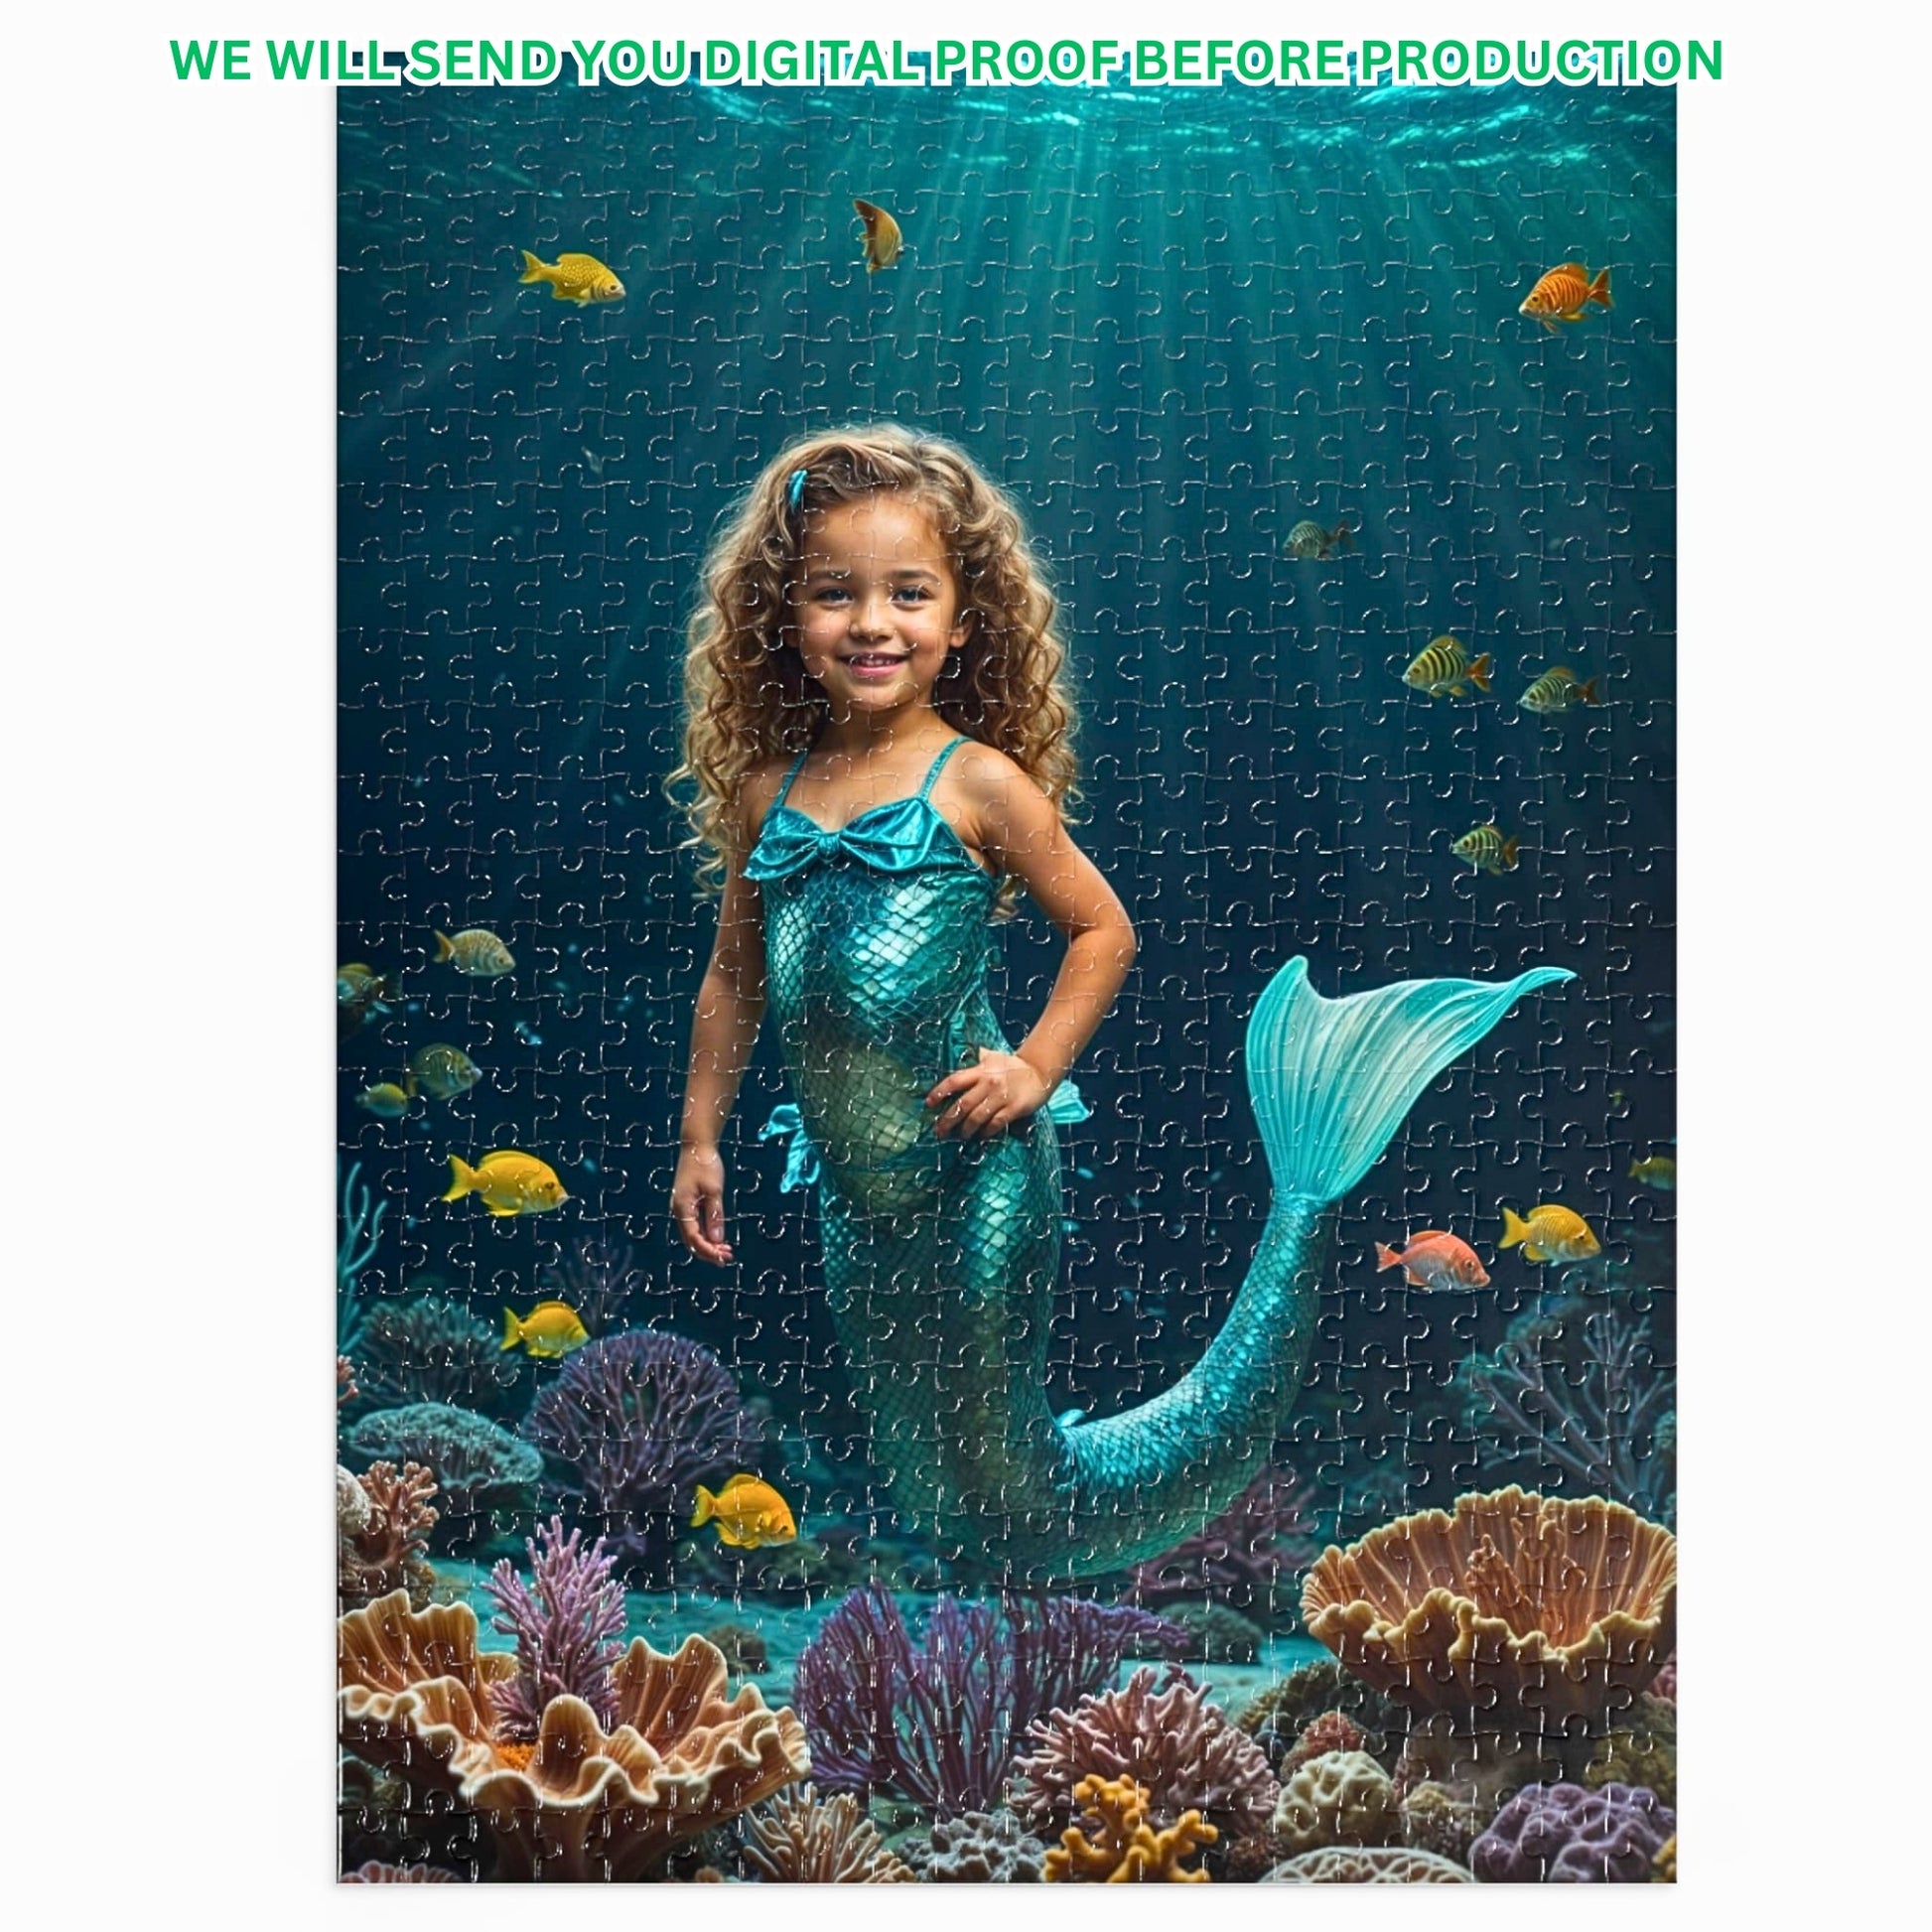 Dive into Creativity with Our Custom Mermaid Puzzle from Photo! Bring Your Memories to Life with a Personalized Little Mermaid Puzzle. The Perfect Princess Birthday Gift for Girls. Choose from 250 to 1000 Pieces for a Fun Challenge!